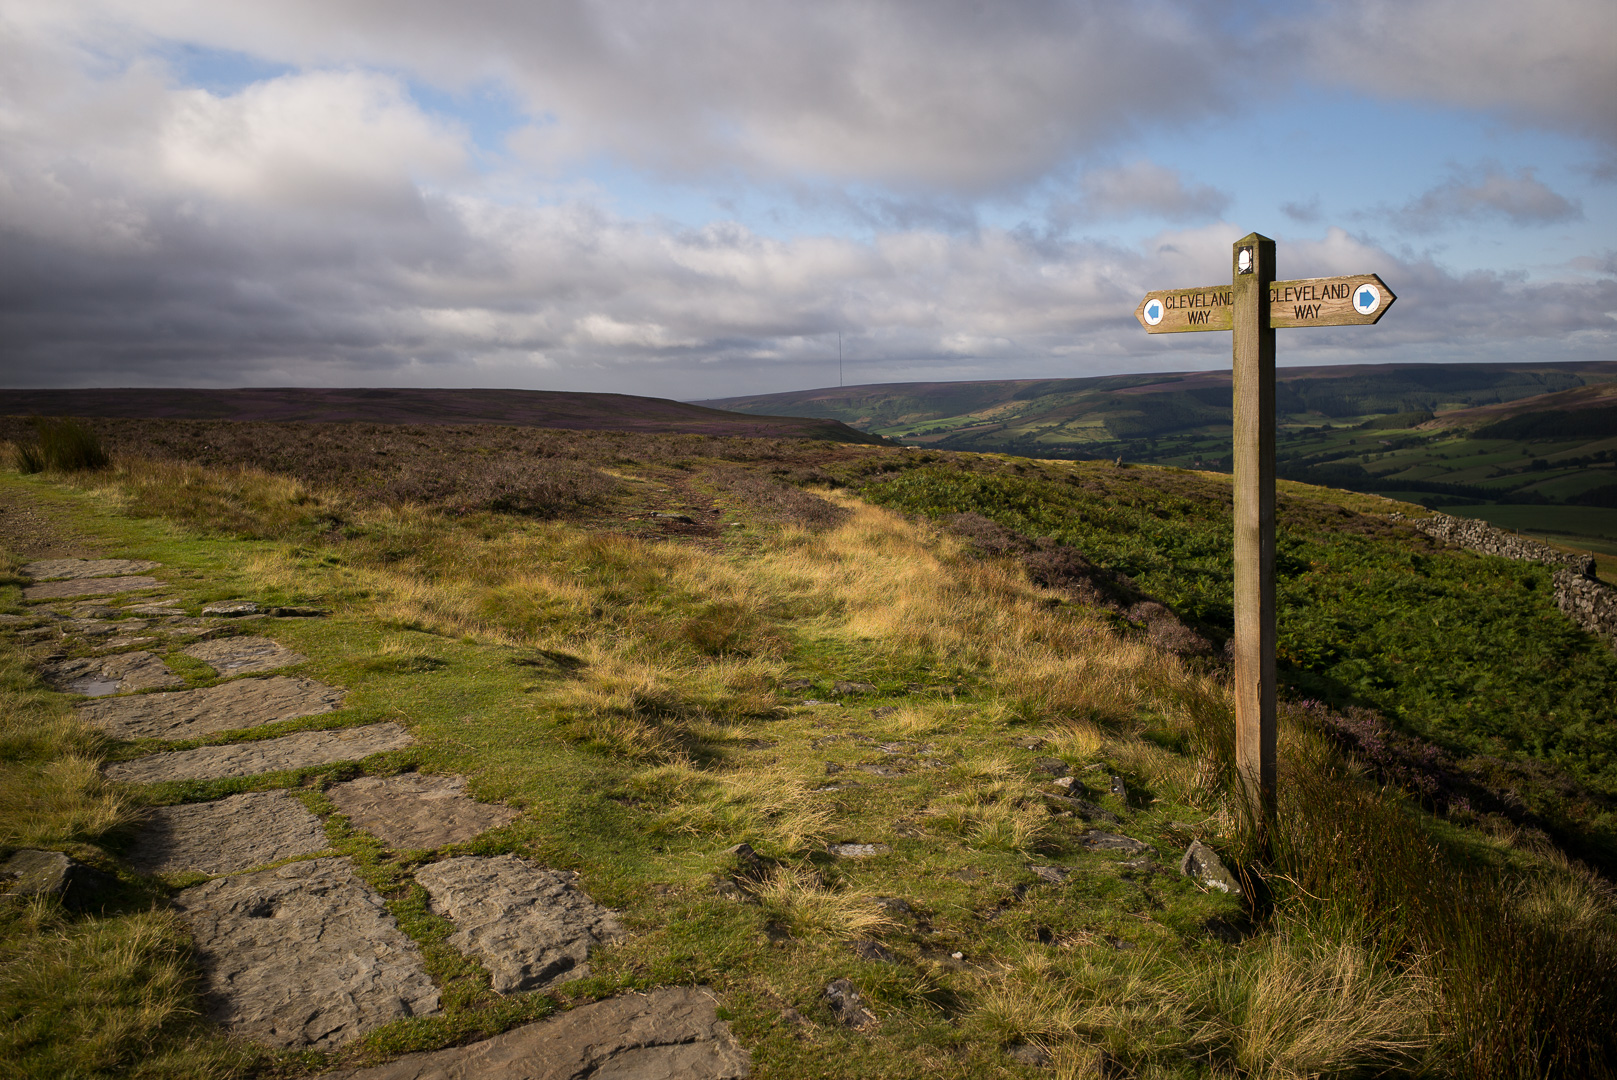 On the path. For alot of the way through the North York Moors, the Coast to Coast trail shares the trail with the Cleveland Way (a very well maintained National path). They have signposts even!